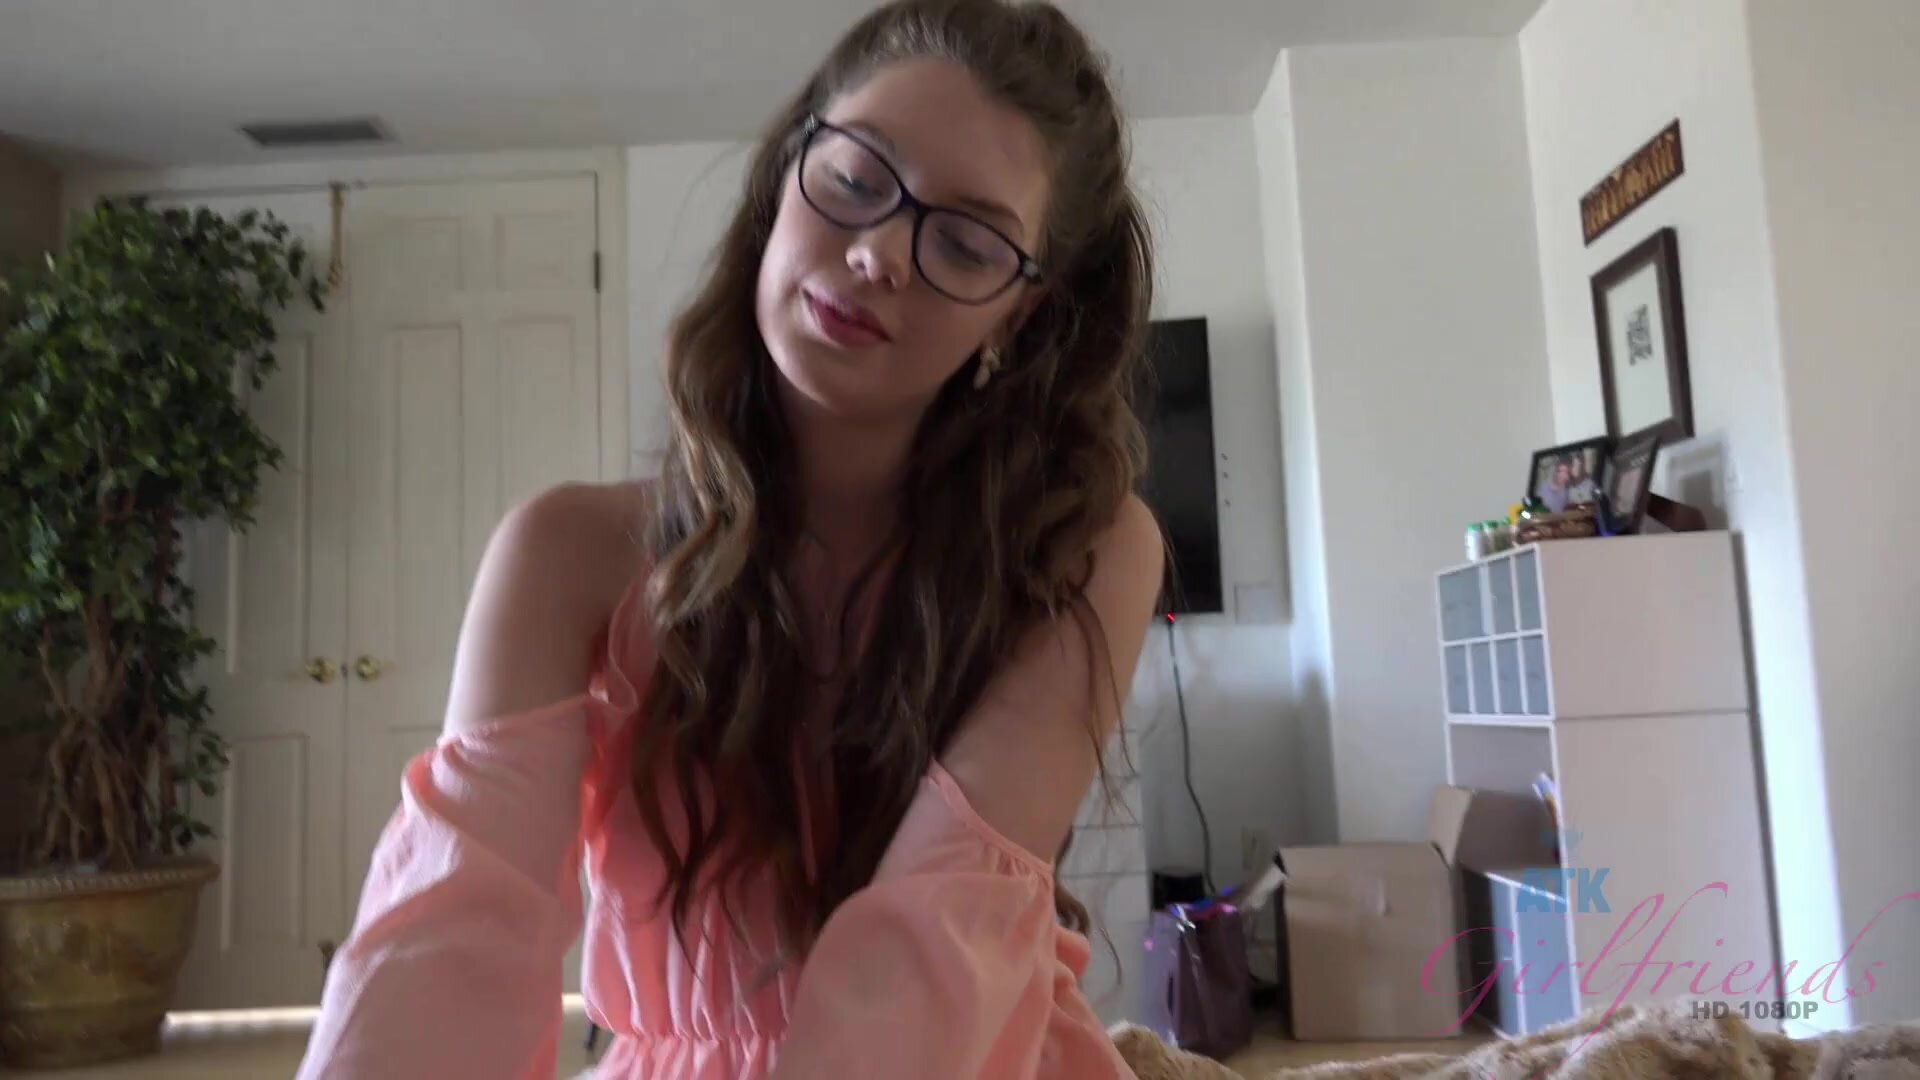 ATKGirlfriends - Sweet Girlfriend With Glasses In Actio